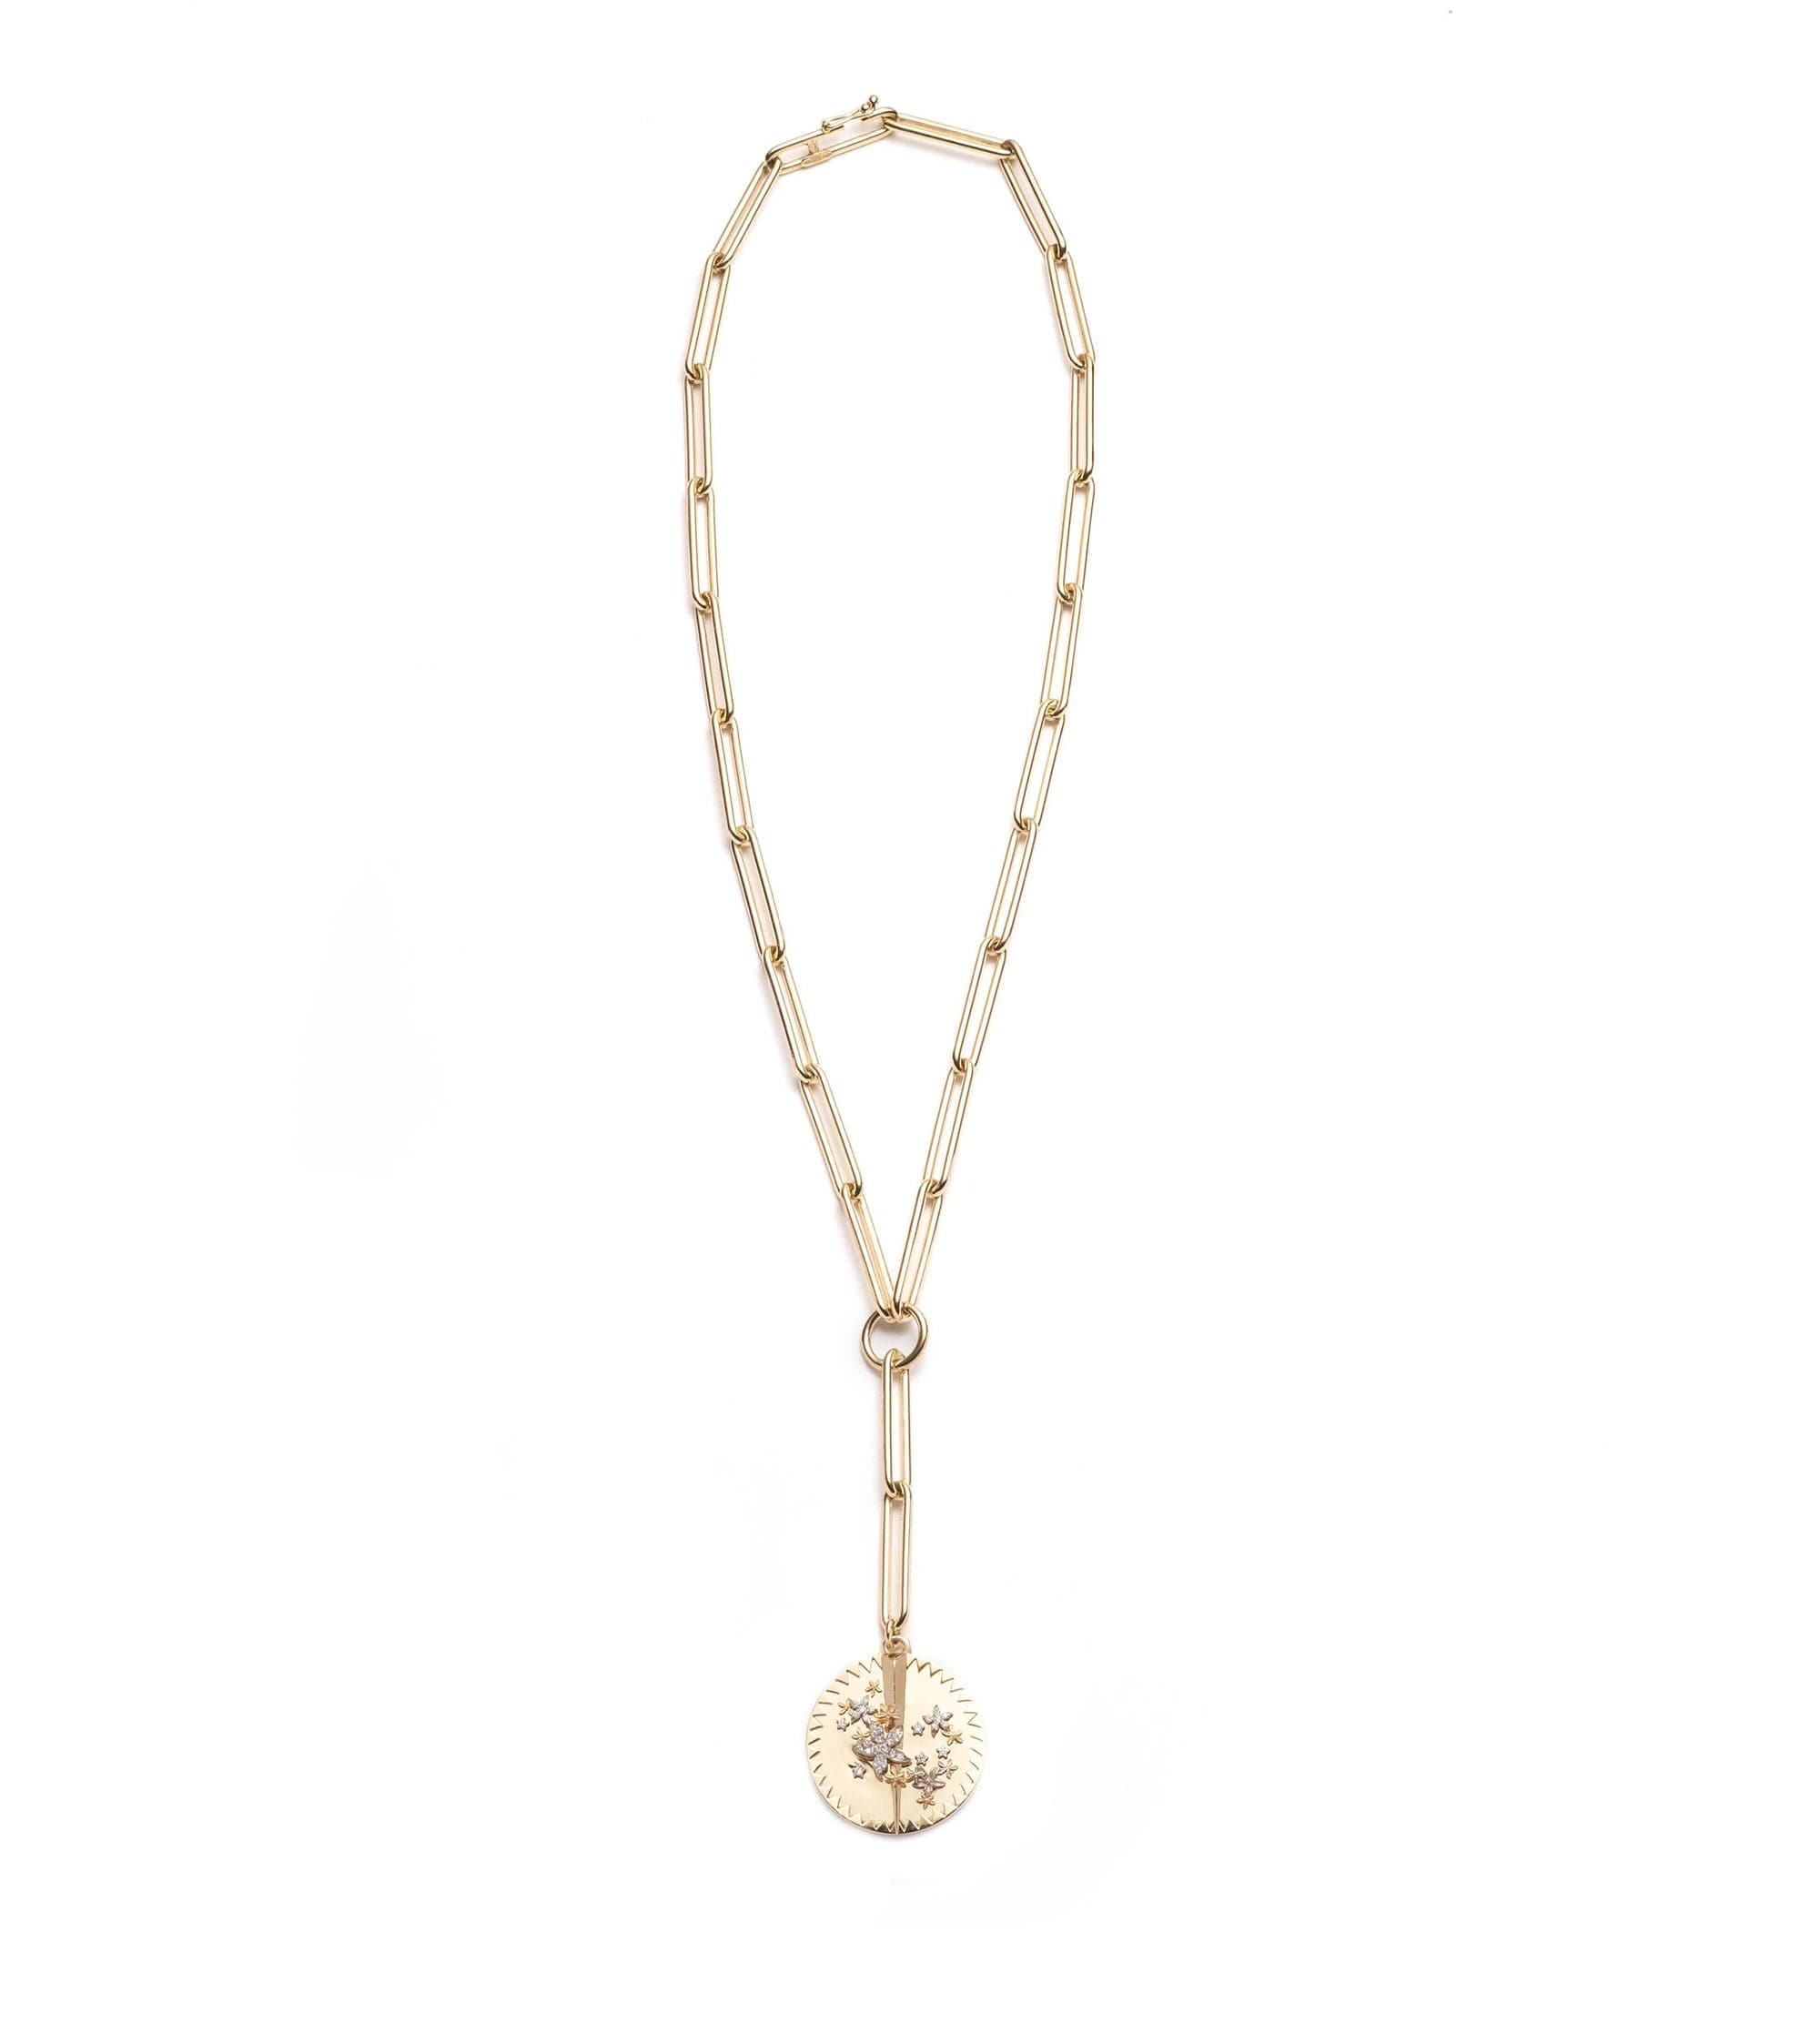 Blossoms - Resilience : Extended Clip Extension Chain Necklace